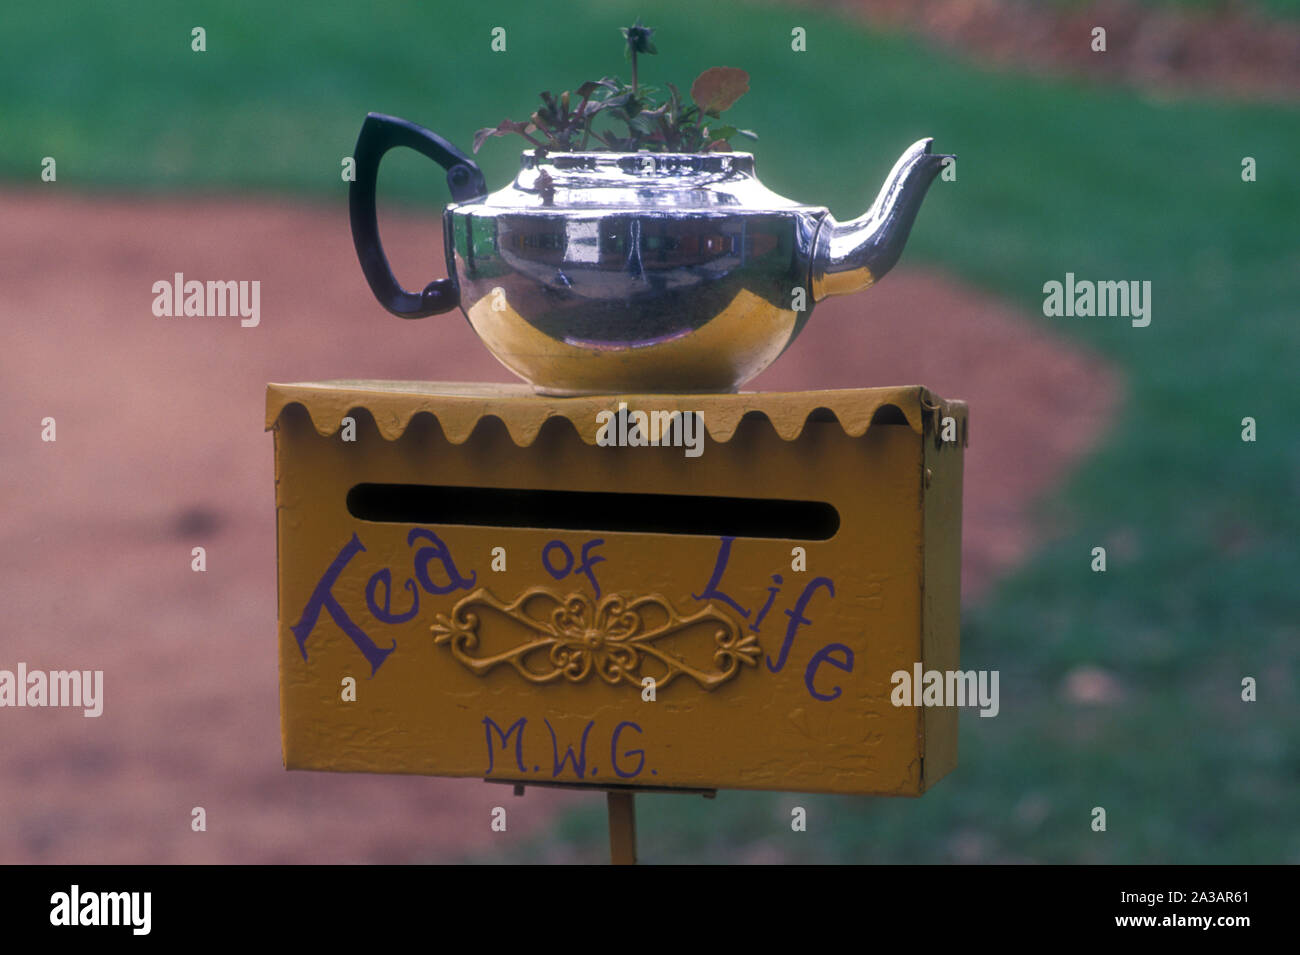 TEA OF LIFE LETTERBOX WITH TEAPOT ON TOP, NEW SOUTH WALES, AUSTRALIA. Stock Photo